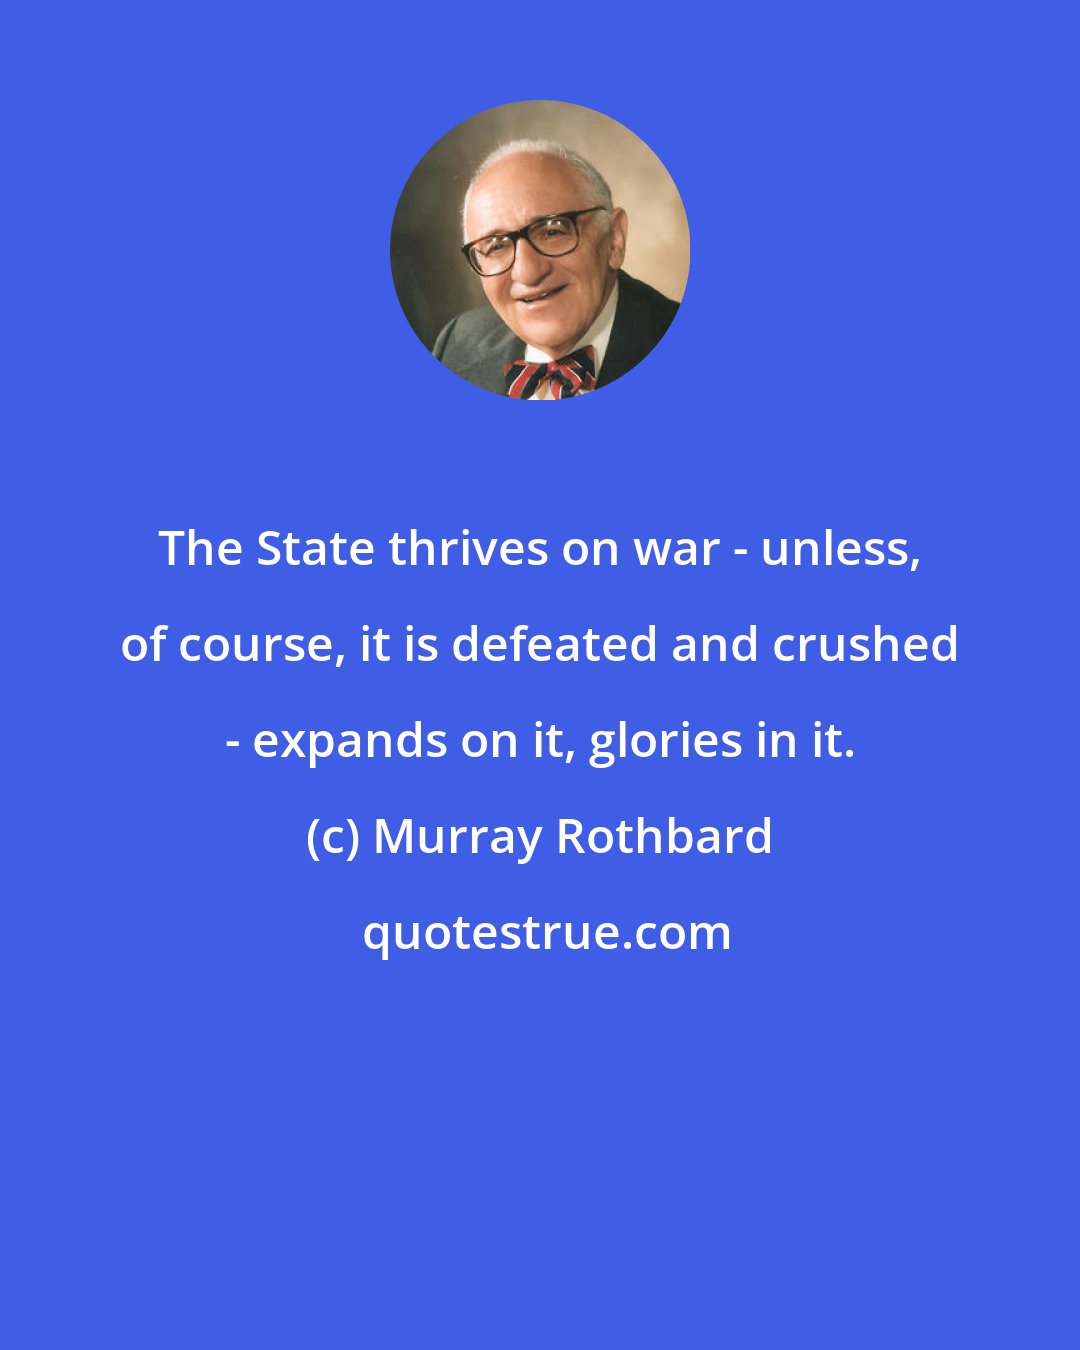 Murray Rothbard: The State thrives on war - unless, of course, it is defeated and crushed - expands on it, glories in it.